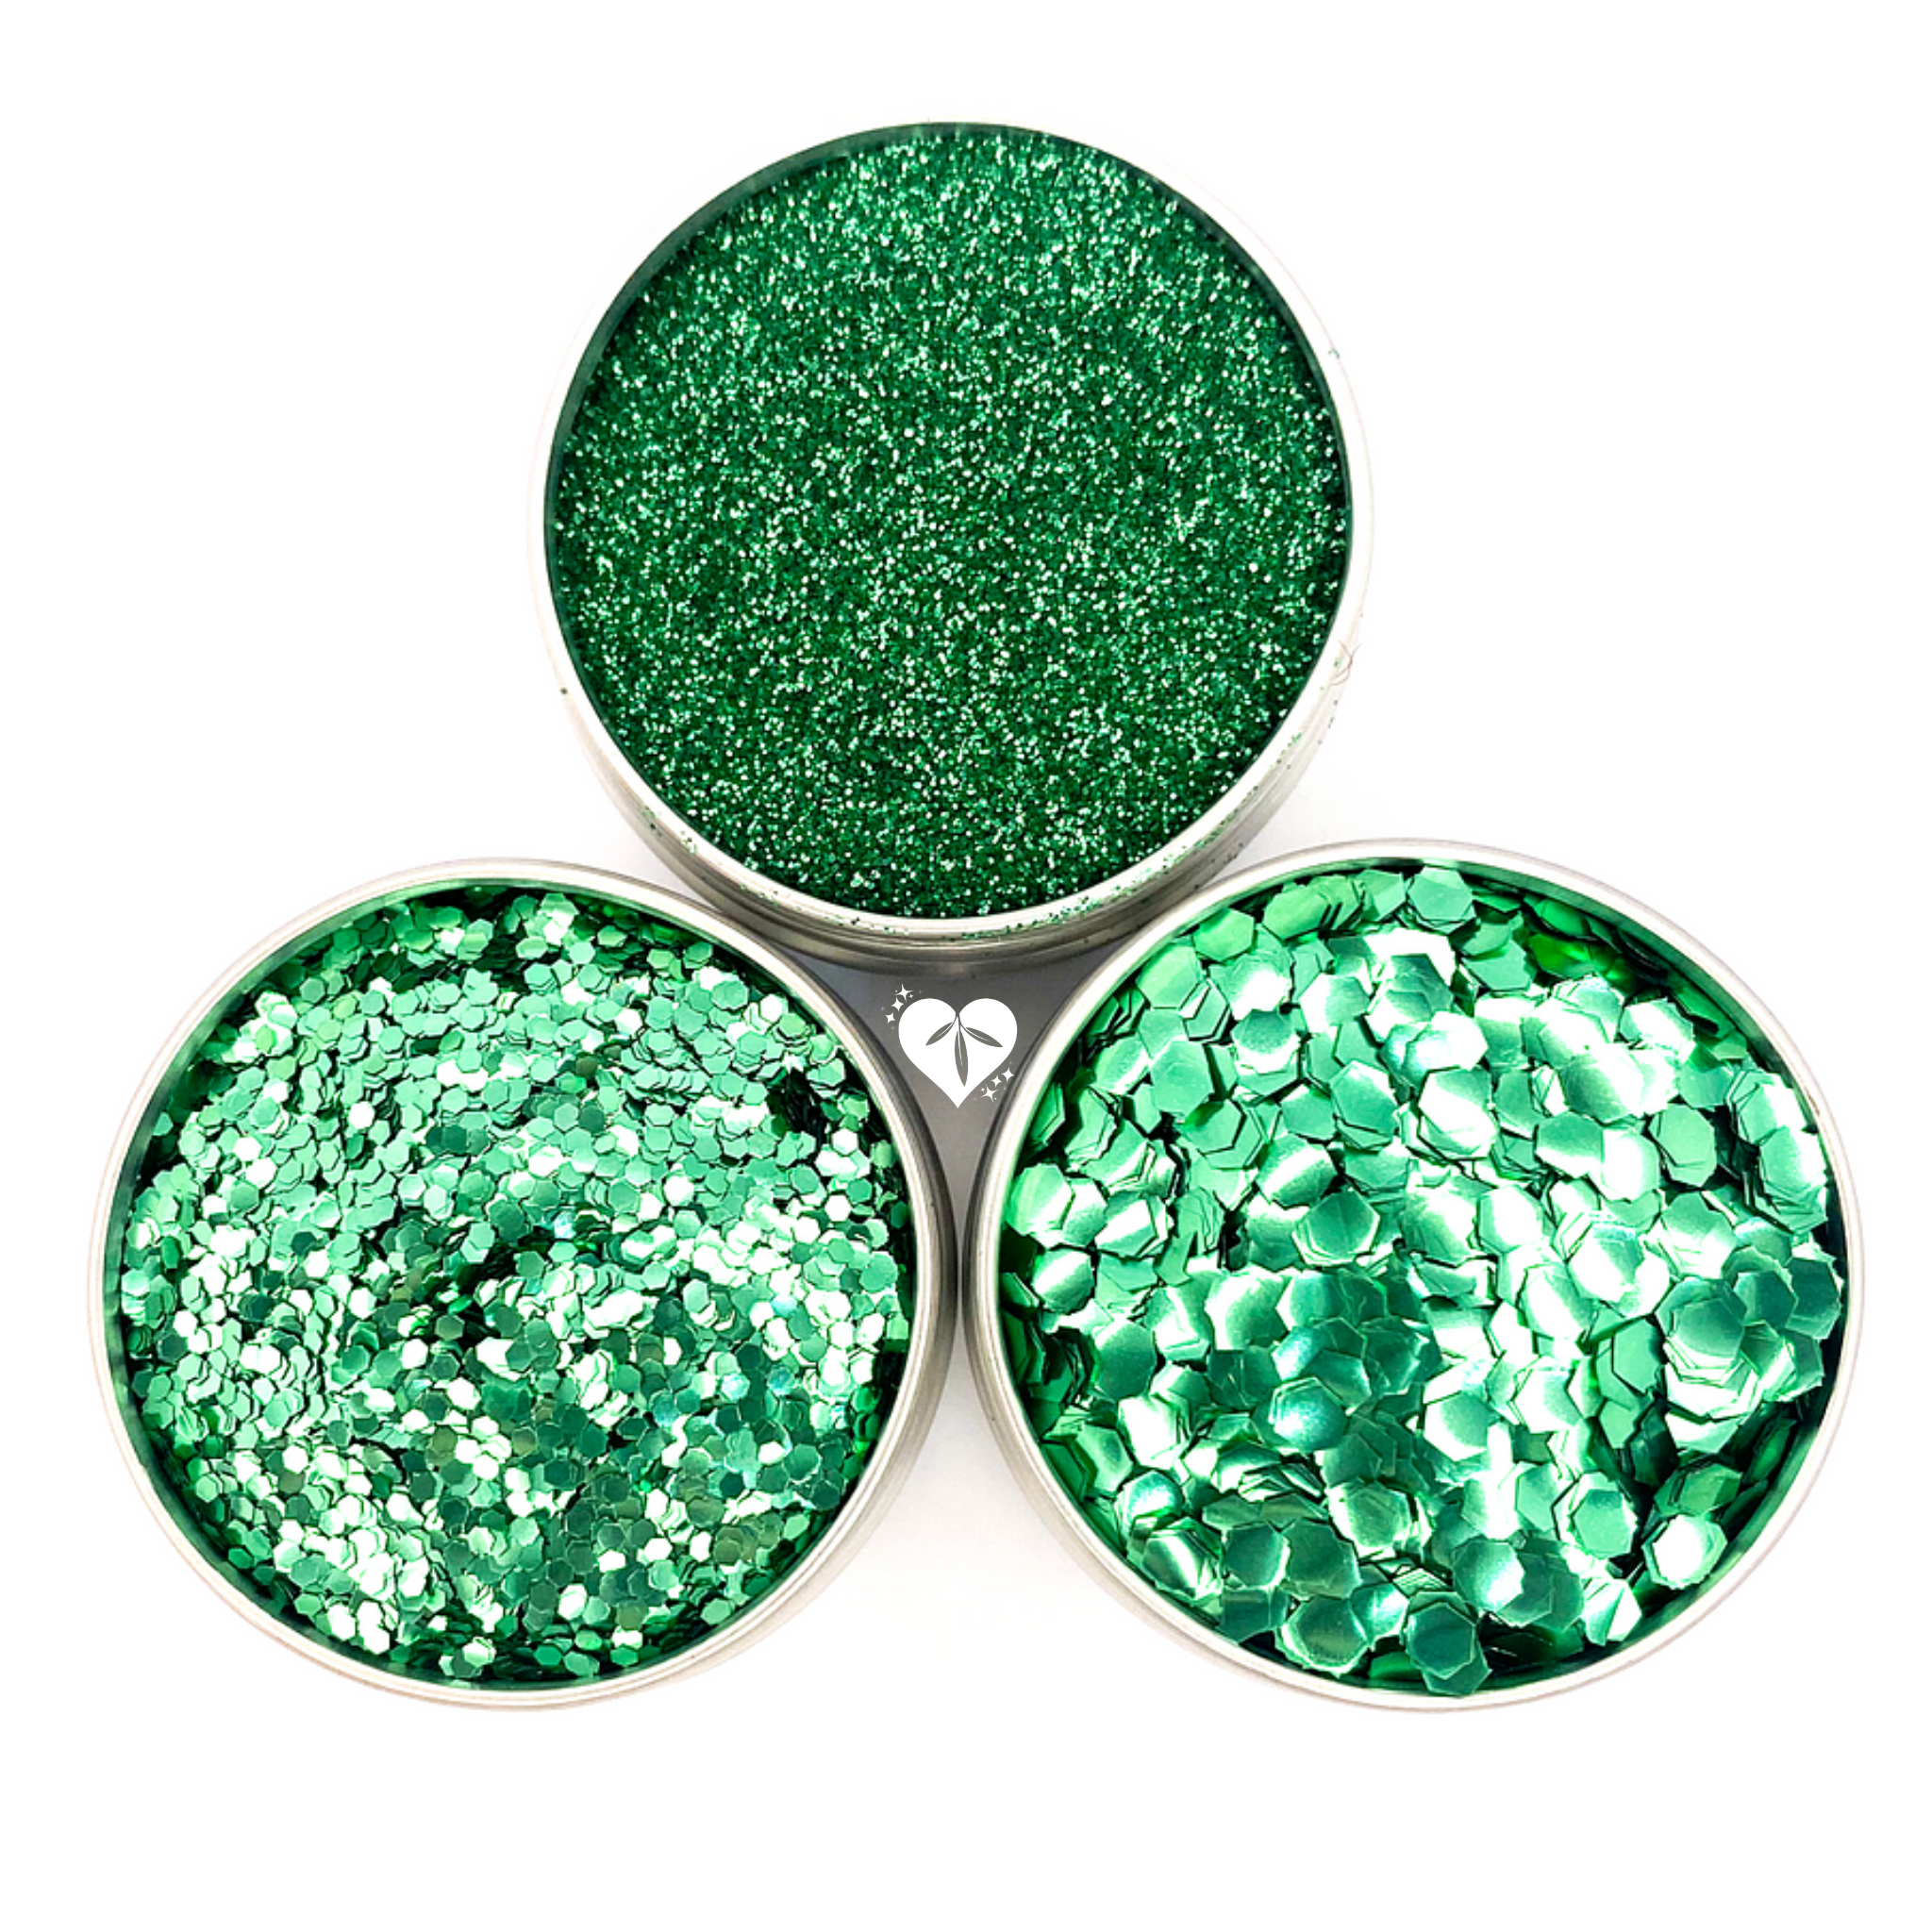 Green biodegradable glitter trio in fine, chunky and ultra chunky glitter sizes for hair, face, body and crafting.